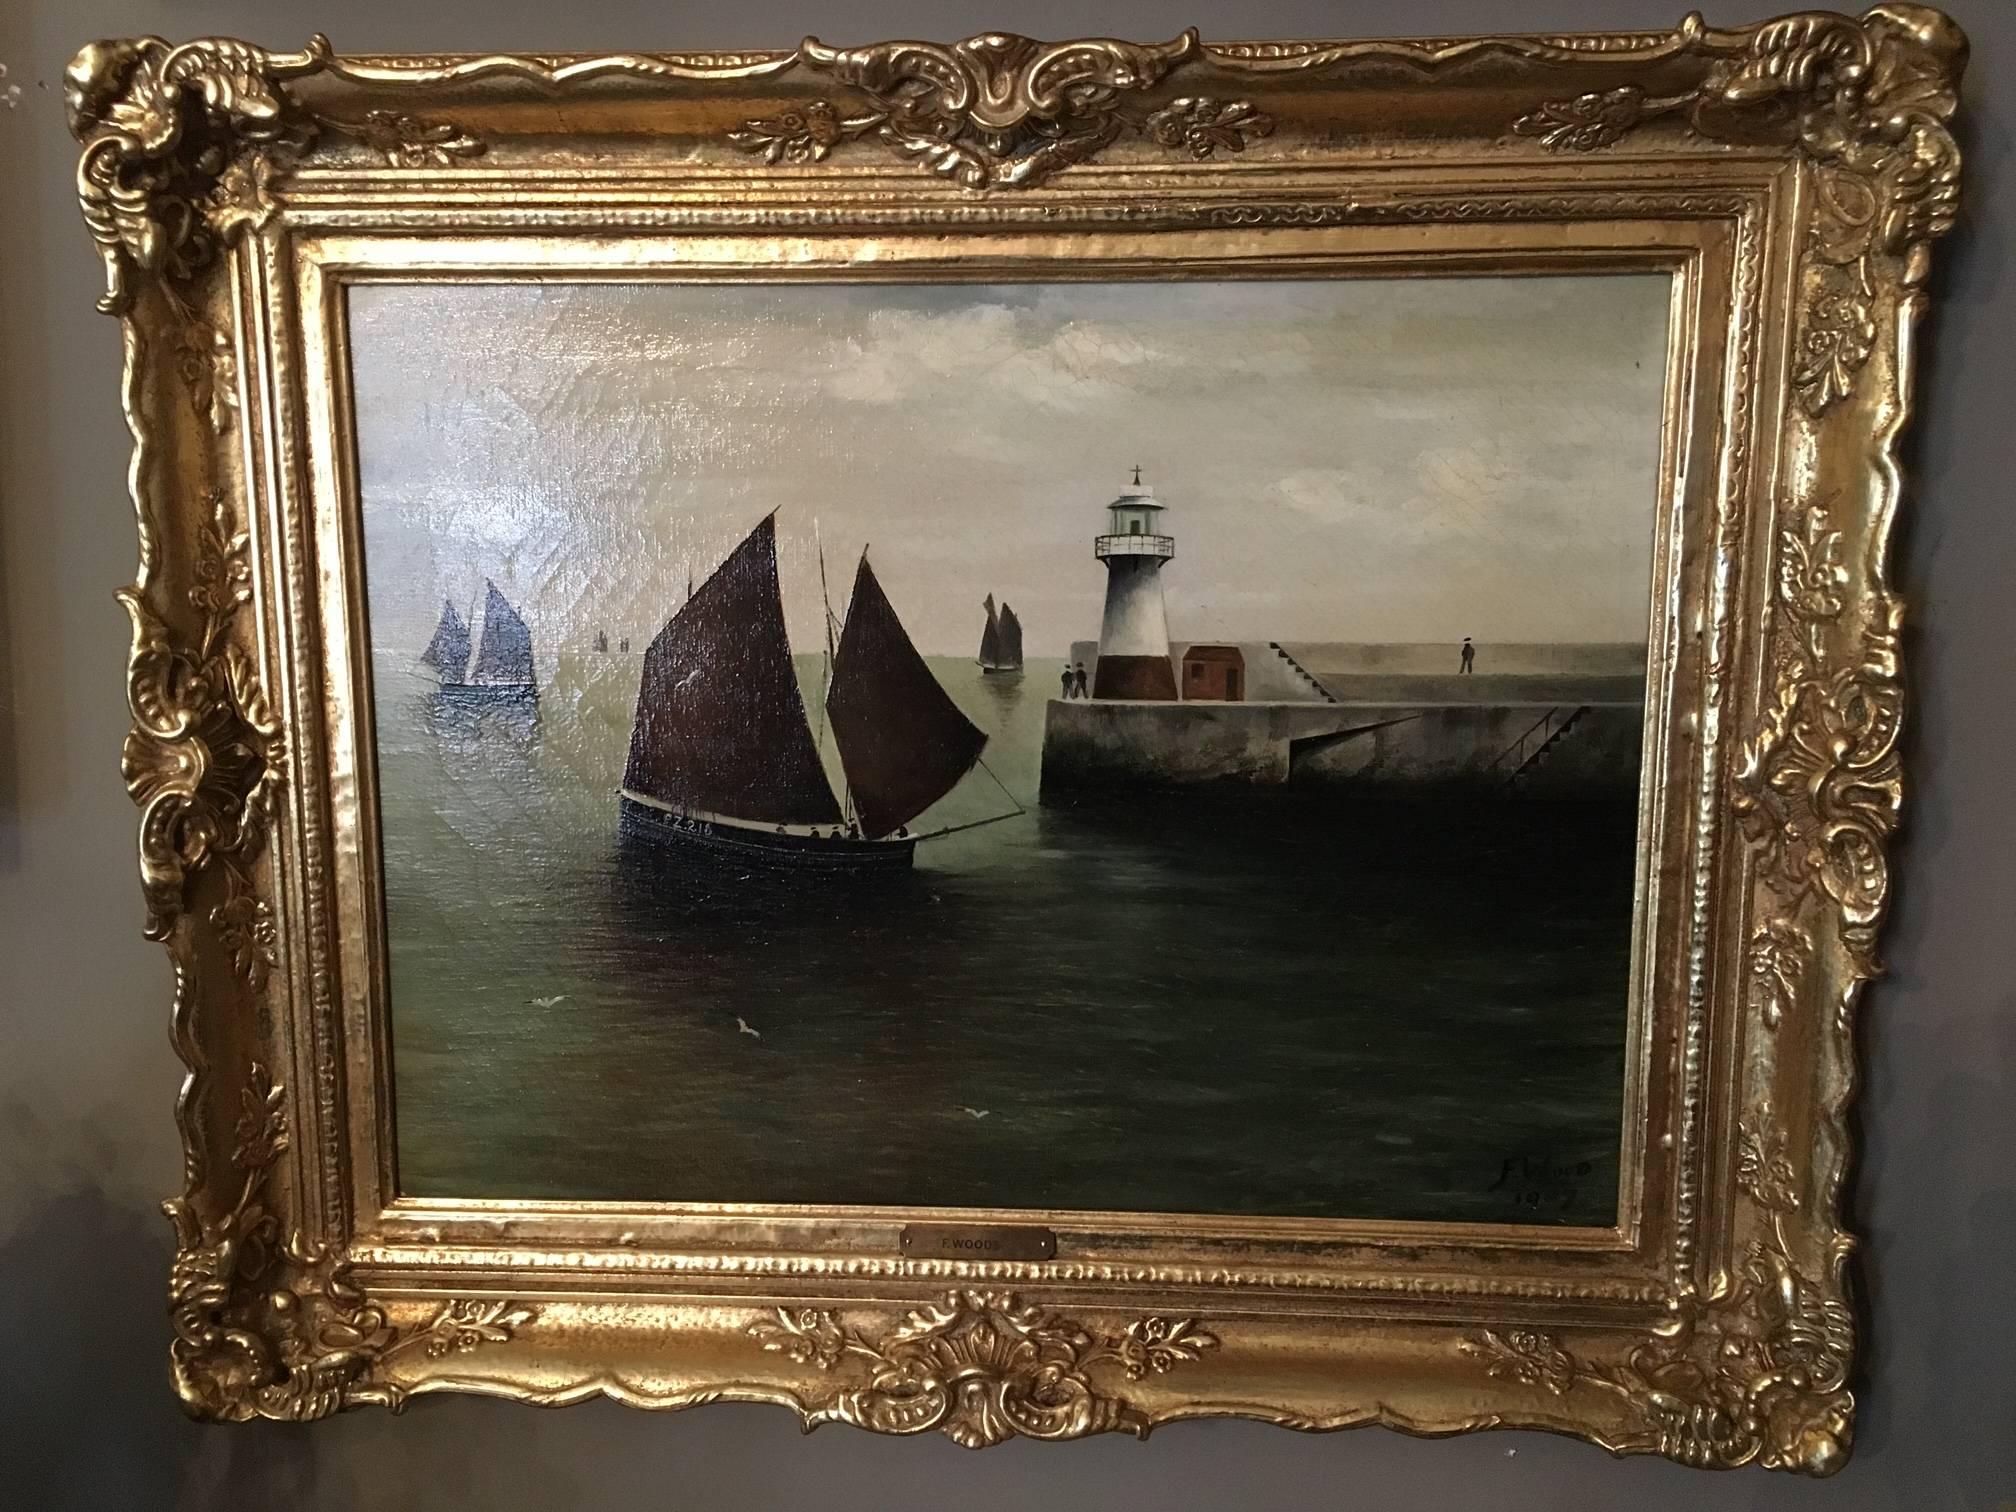 F. wood painting, signed and dated 1907.
The dimensions below are with a frame. 
The dimensions without the frame are: 23.5